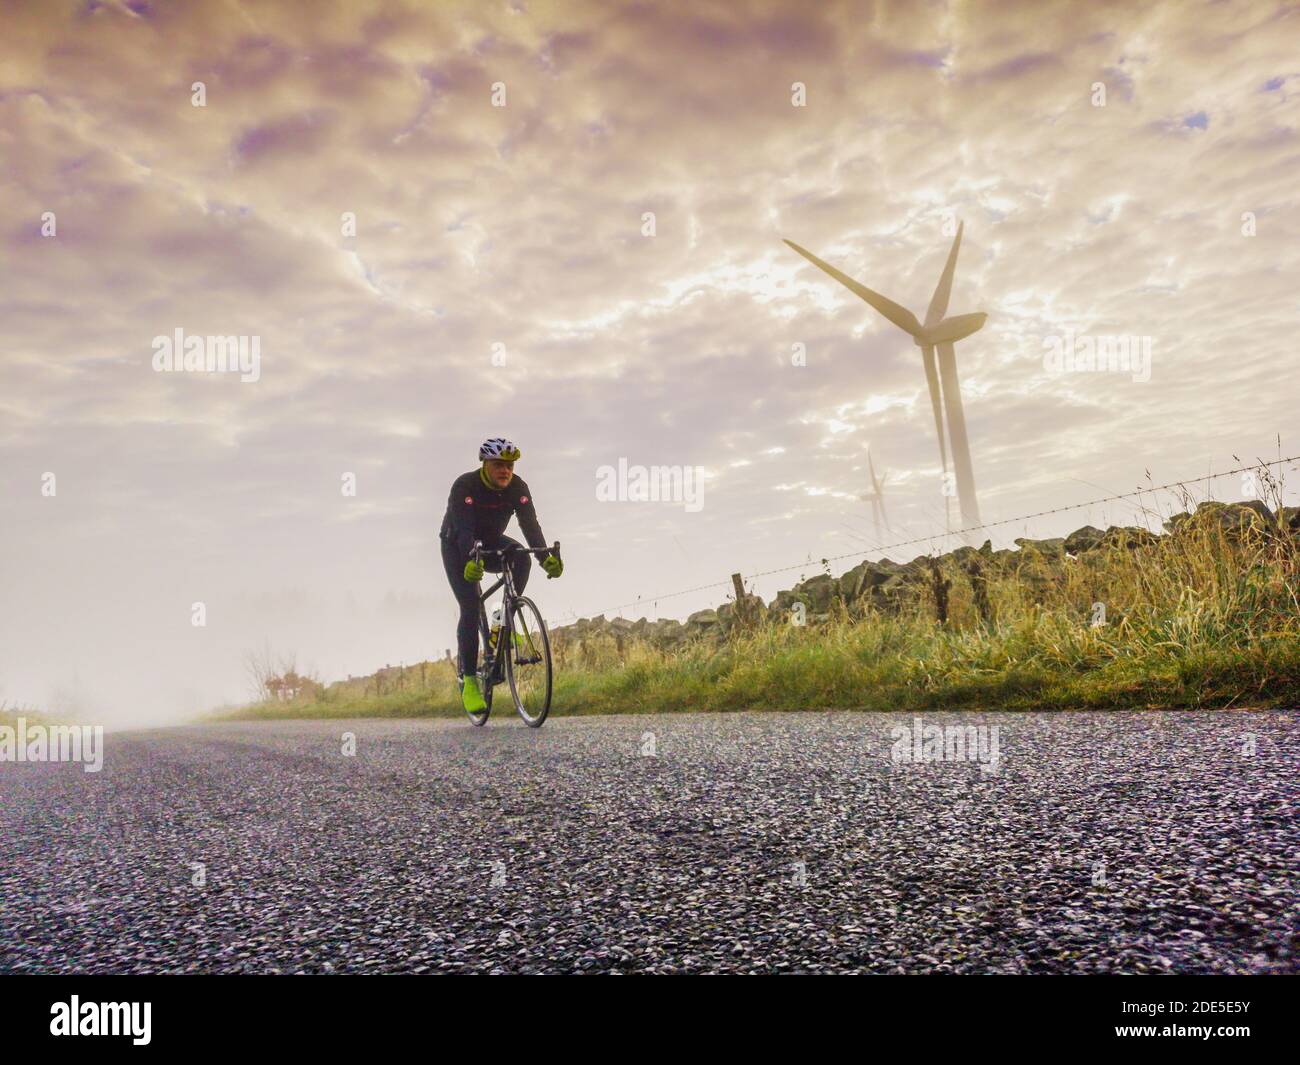 Longpark wind farm Stow, Scottish Borders, UK. 29th Nov, 2020. Weather, mist, cool morning. Wind turbines appear from the low lying mist at Longpark wind farm near Stow in the Scottish Borders, as the early morning sun burns away the mist. Keen road cyclist Paul Richardson, pictured out for a cool mornings spin as the mist rises from the fields. Credit: phil wilkinson/Alamy Live News Stock Photo